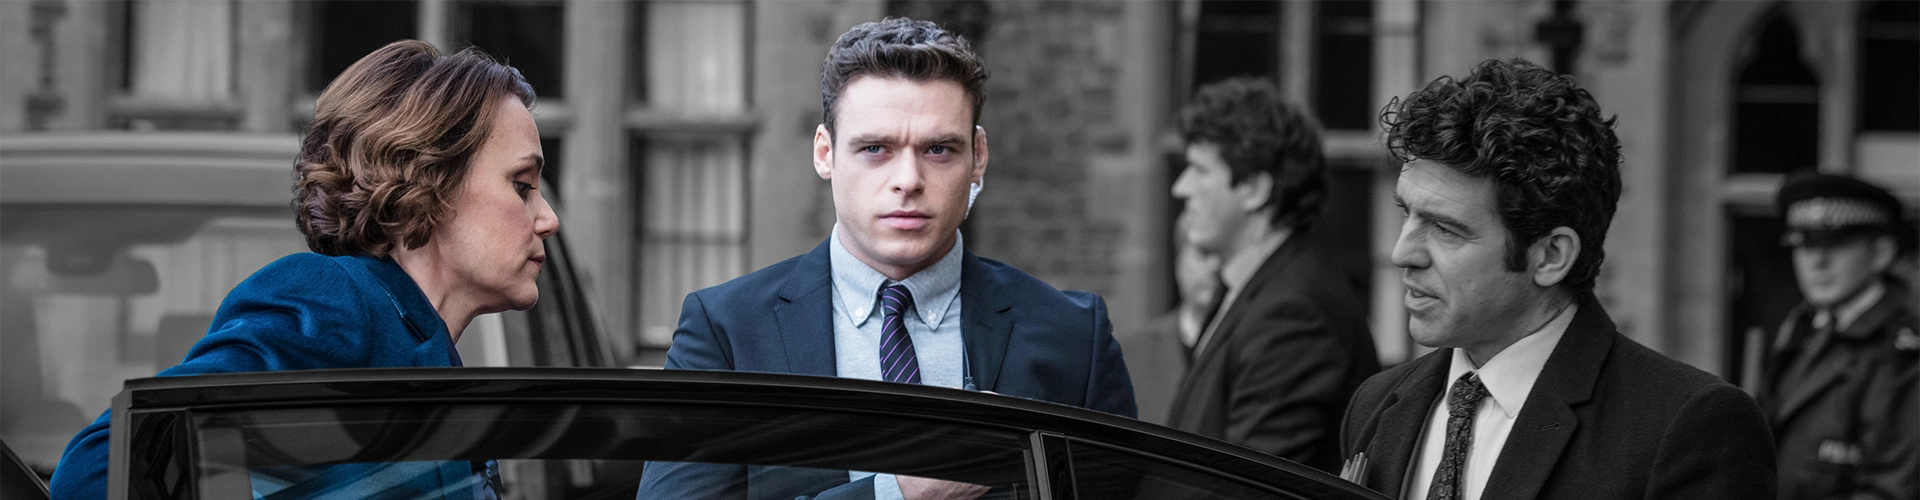 The BBC Series: Bodyguard – Fact from Fiction